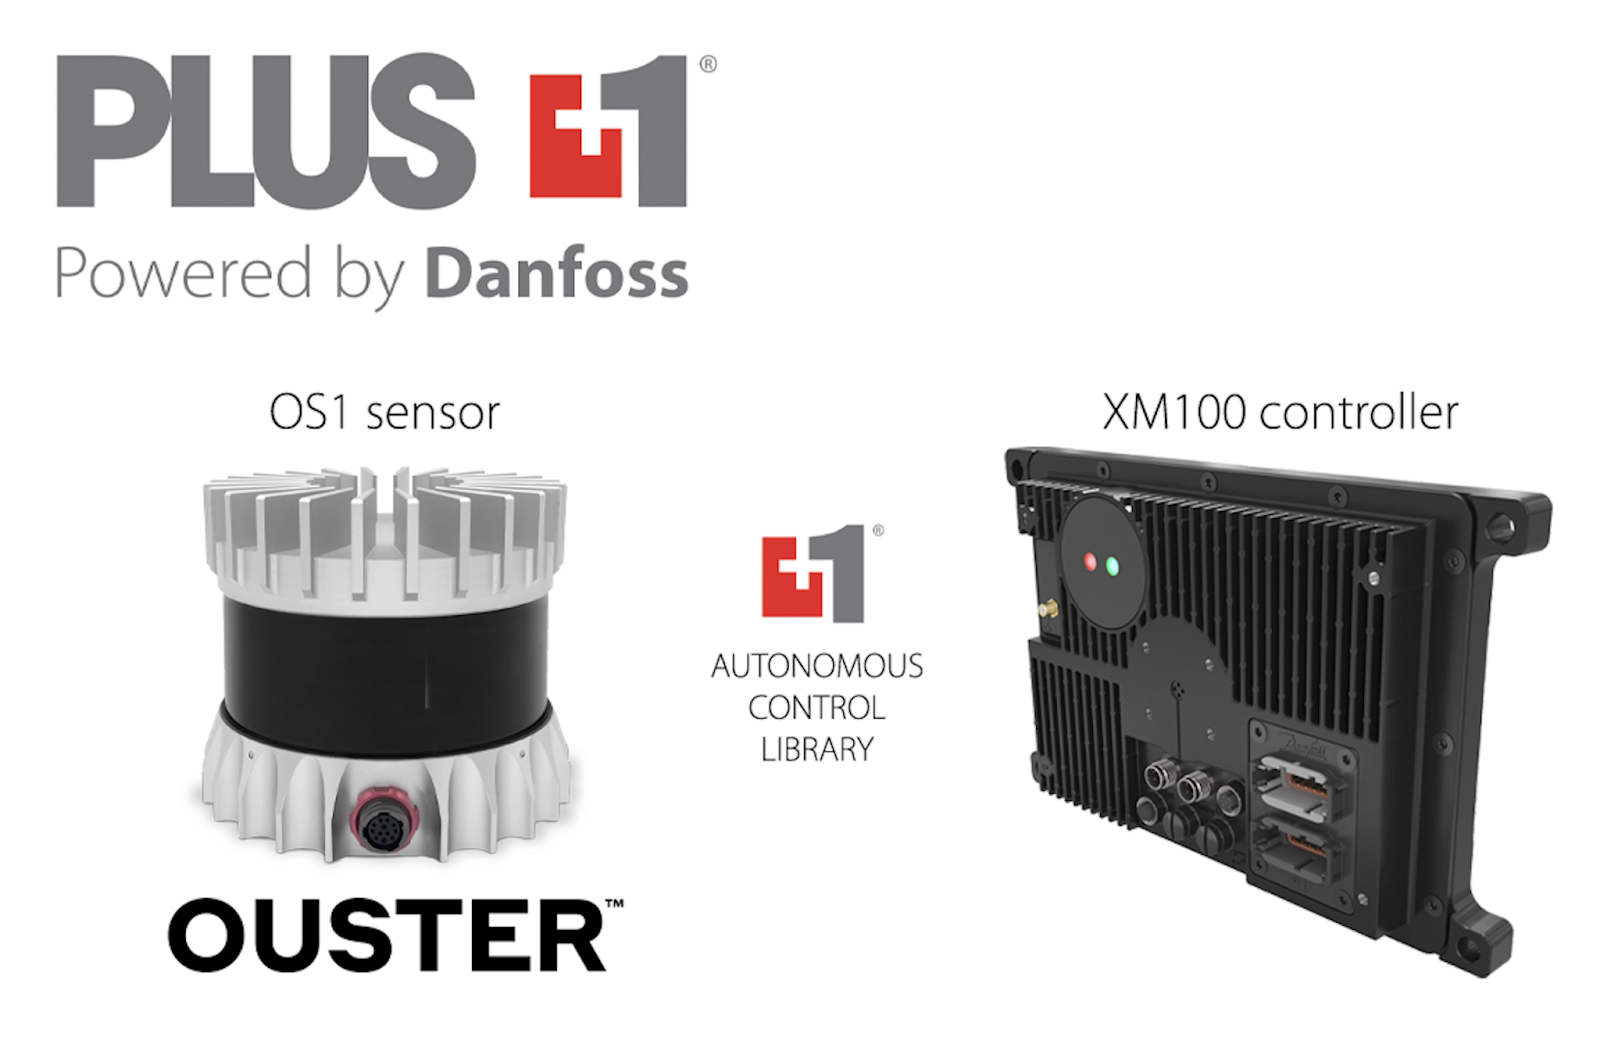 Danfoss and Ouster